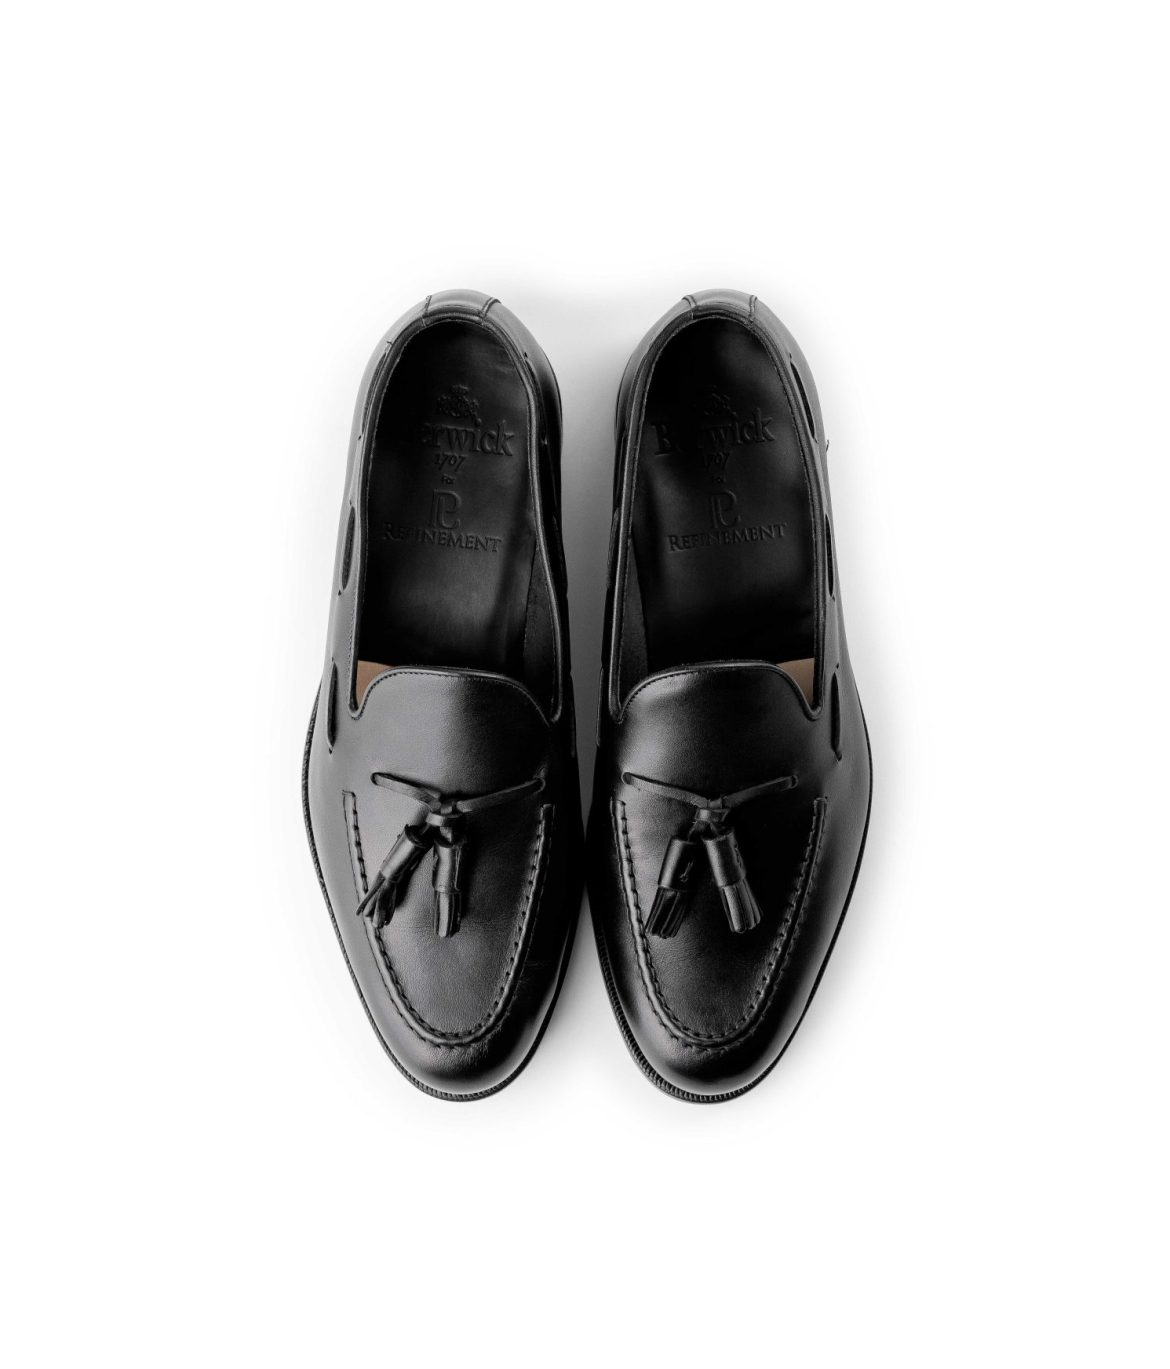 BERWICK 5139 Unlined Tassel Loafer Chateaubriand Negro - The Refinement